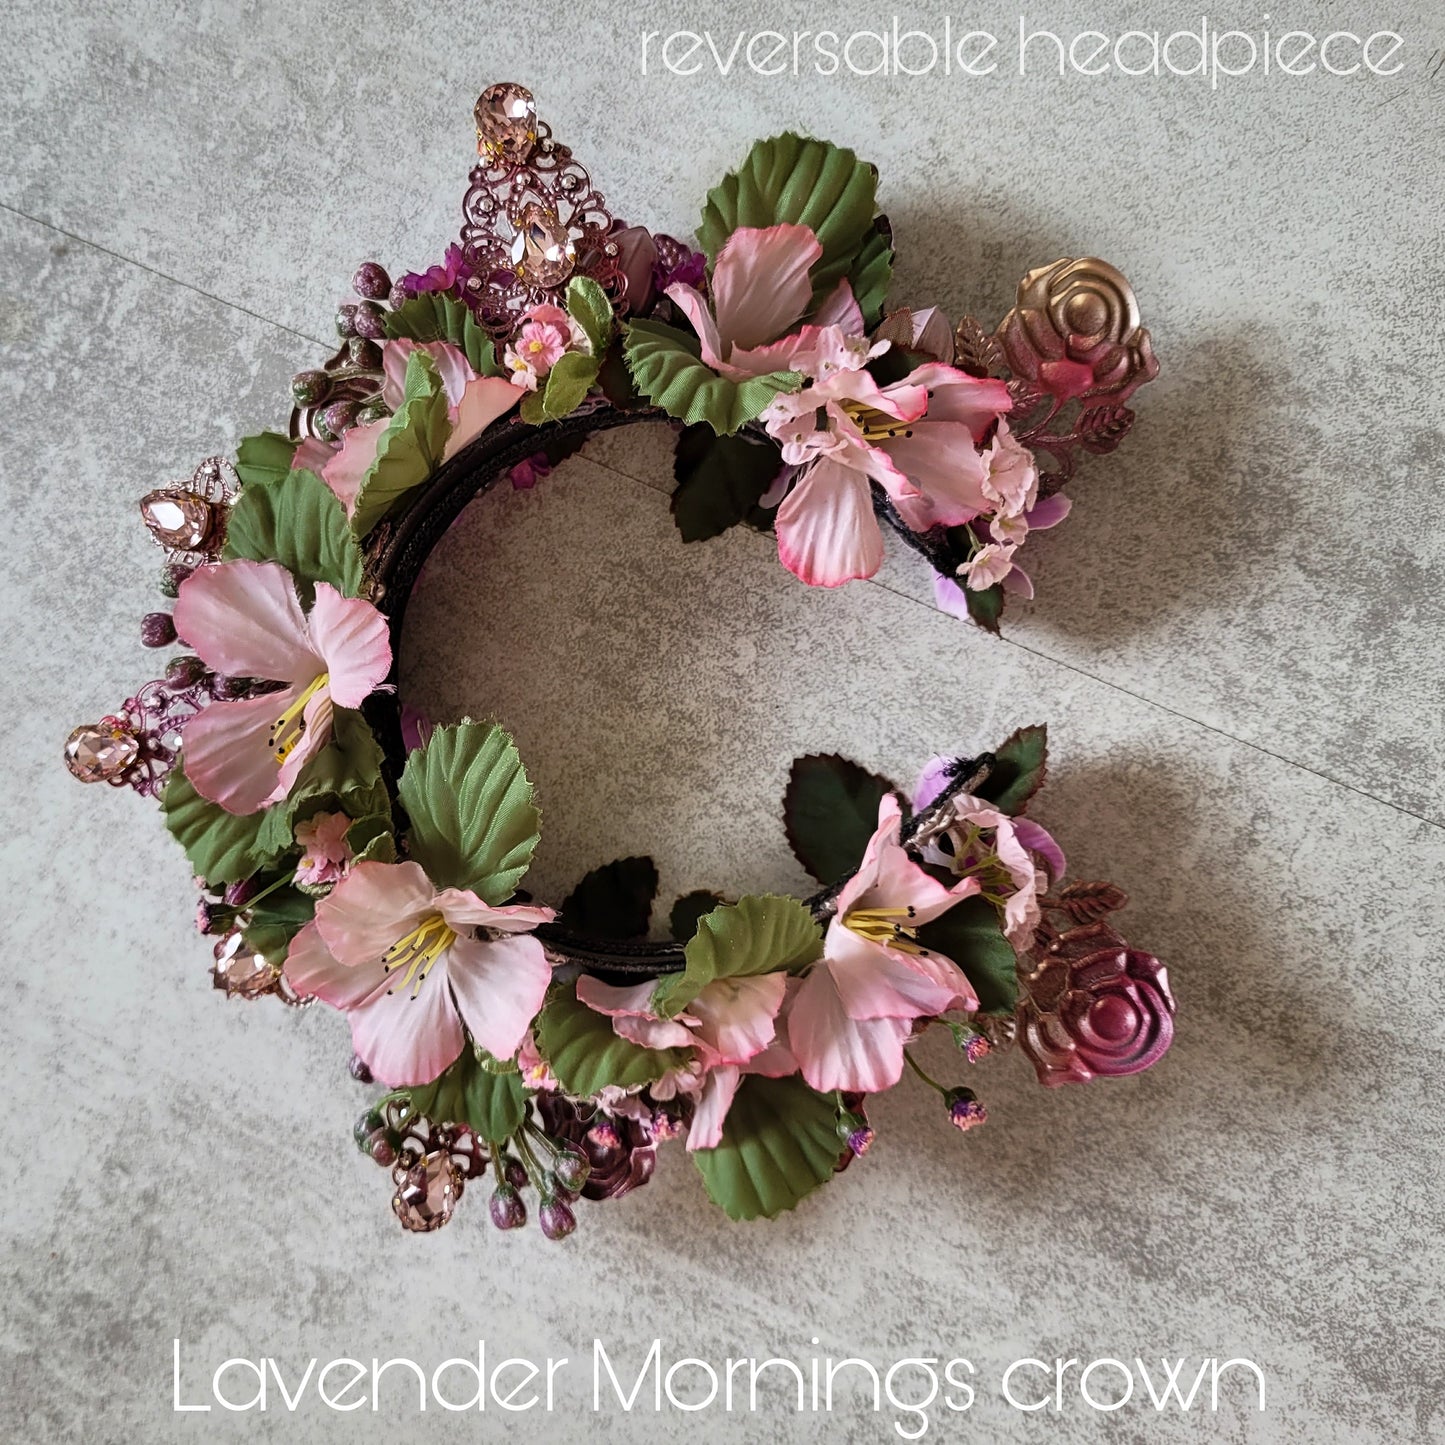 The Lavender Mornings Crown